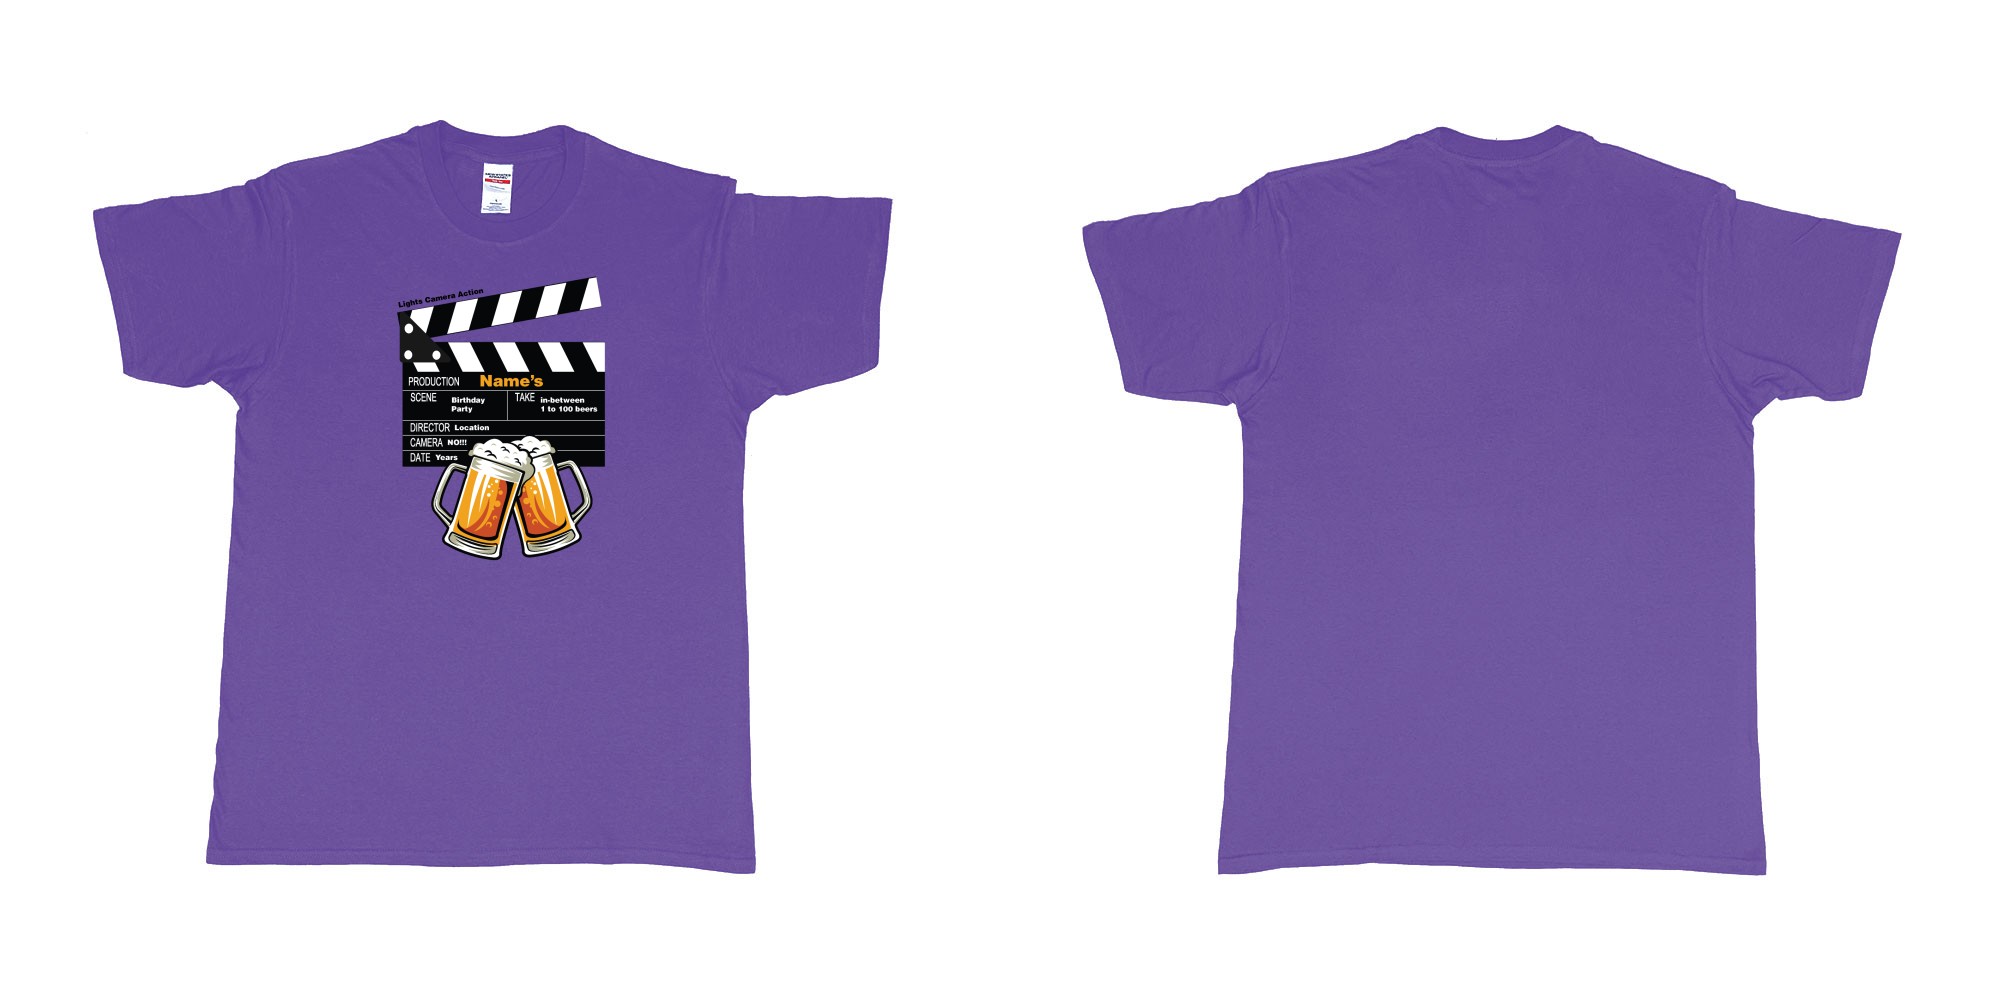 Custom tshirt design birthday beers movie clapperboard in fabric color purple choice your own text made in Bali by The Pirate Way